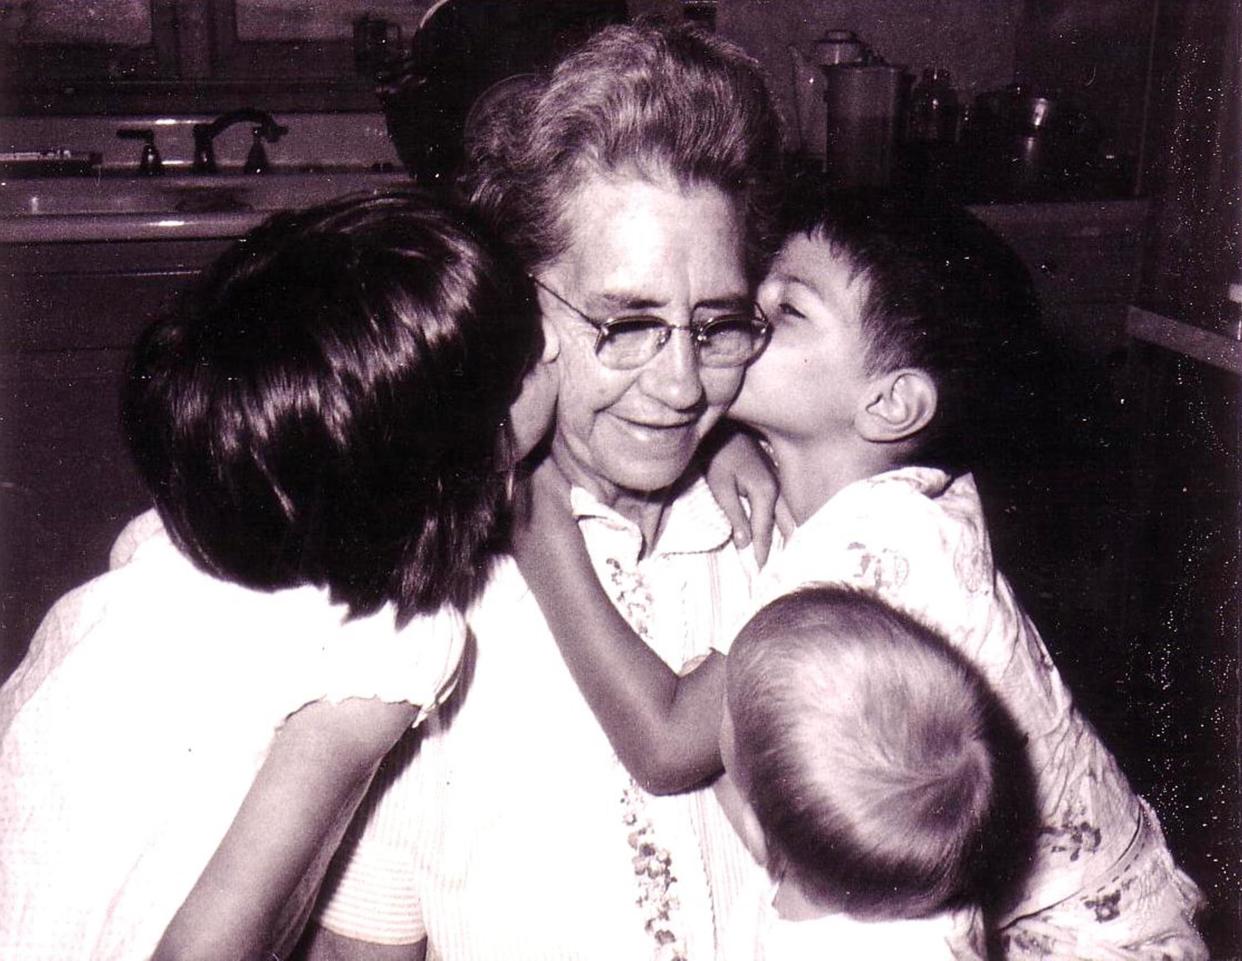 Annie Thompson McKinney — on her 64th birthday in 1967 — receives kisses from her grandchildren, Laura McKinney Wilfong (now Holland), left; Harry Wilfong, right; and Billy Wilfong in front.